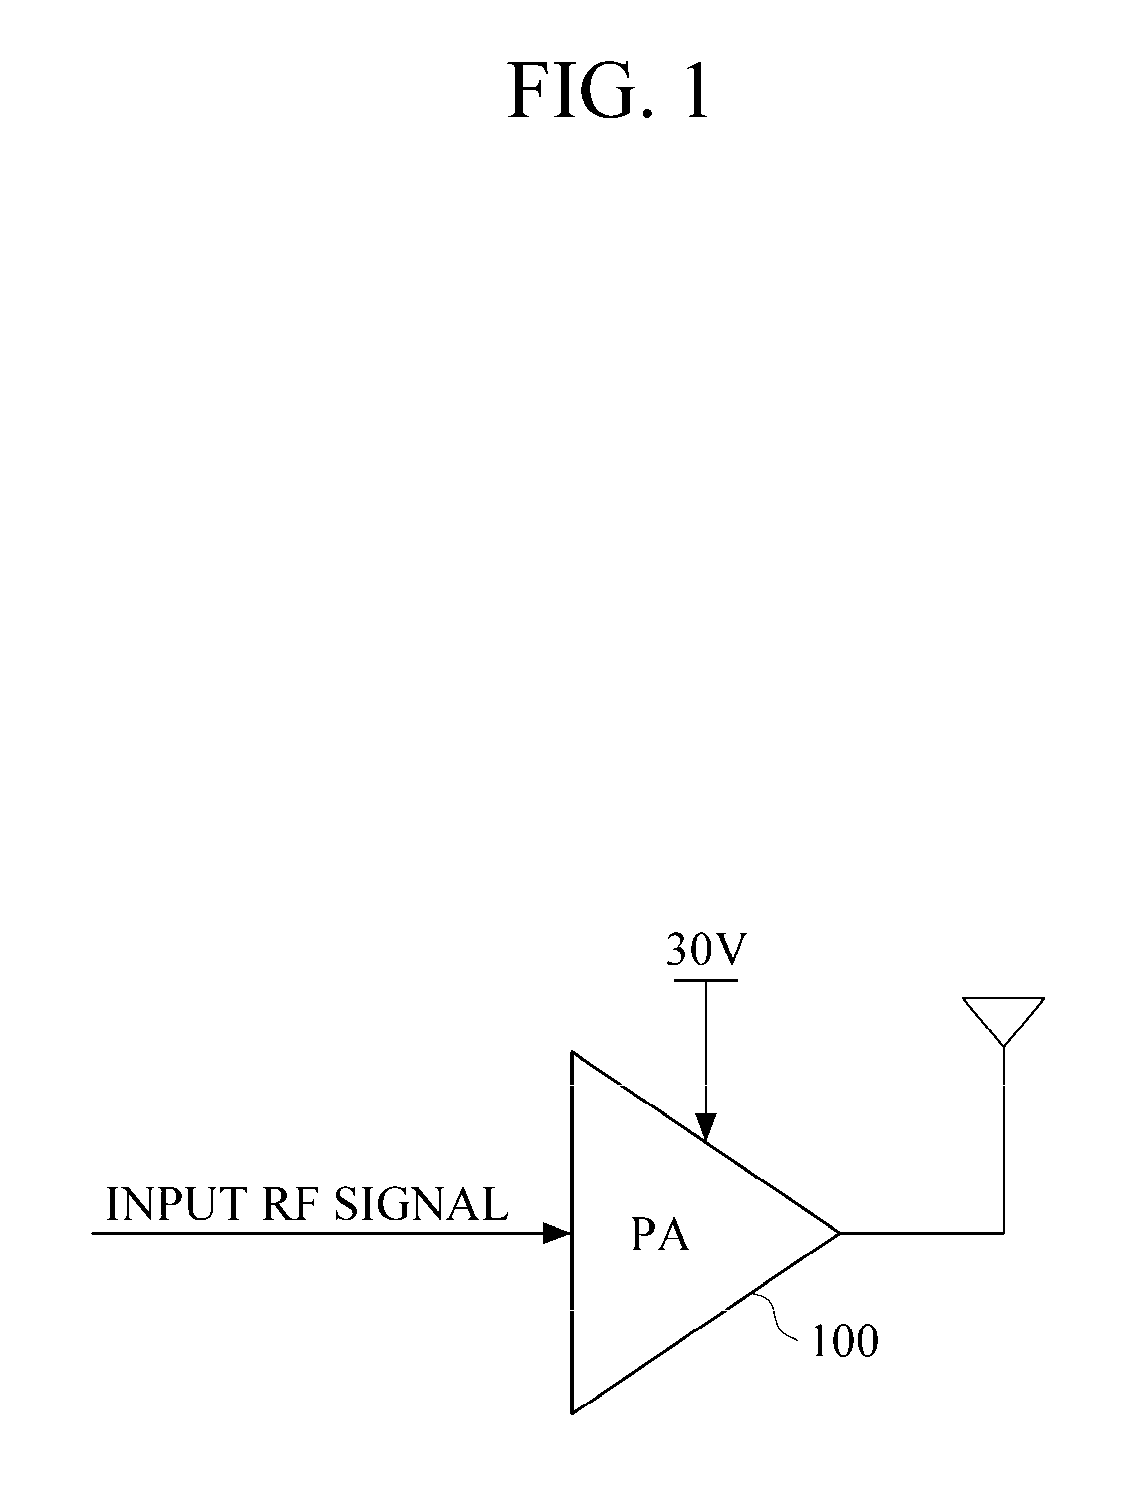 Digital pre-distortion power amplifying apparatus and method for digitally controlling synchronization thereof